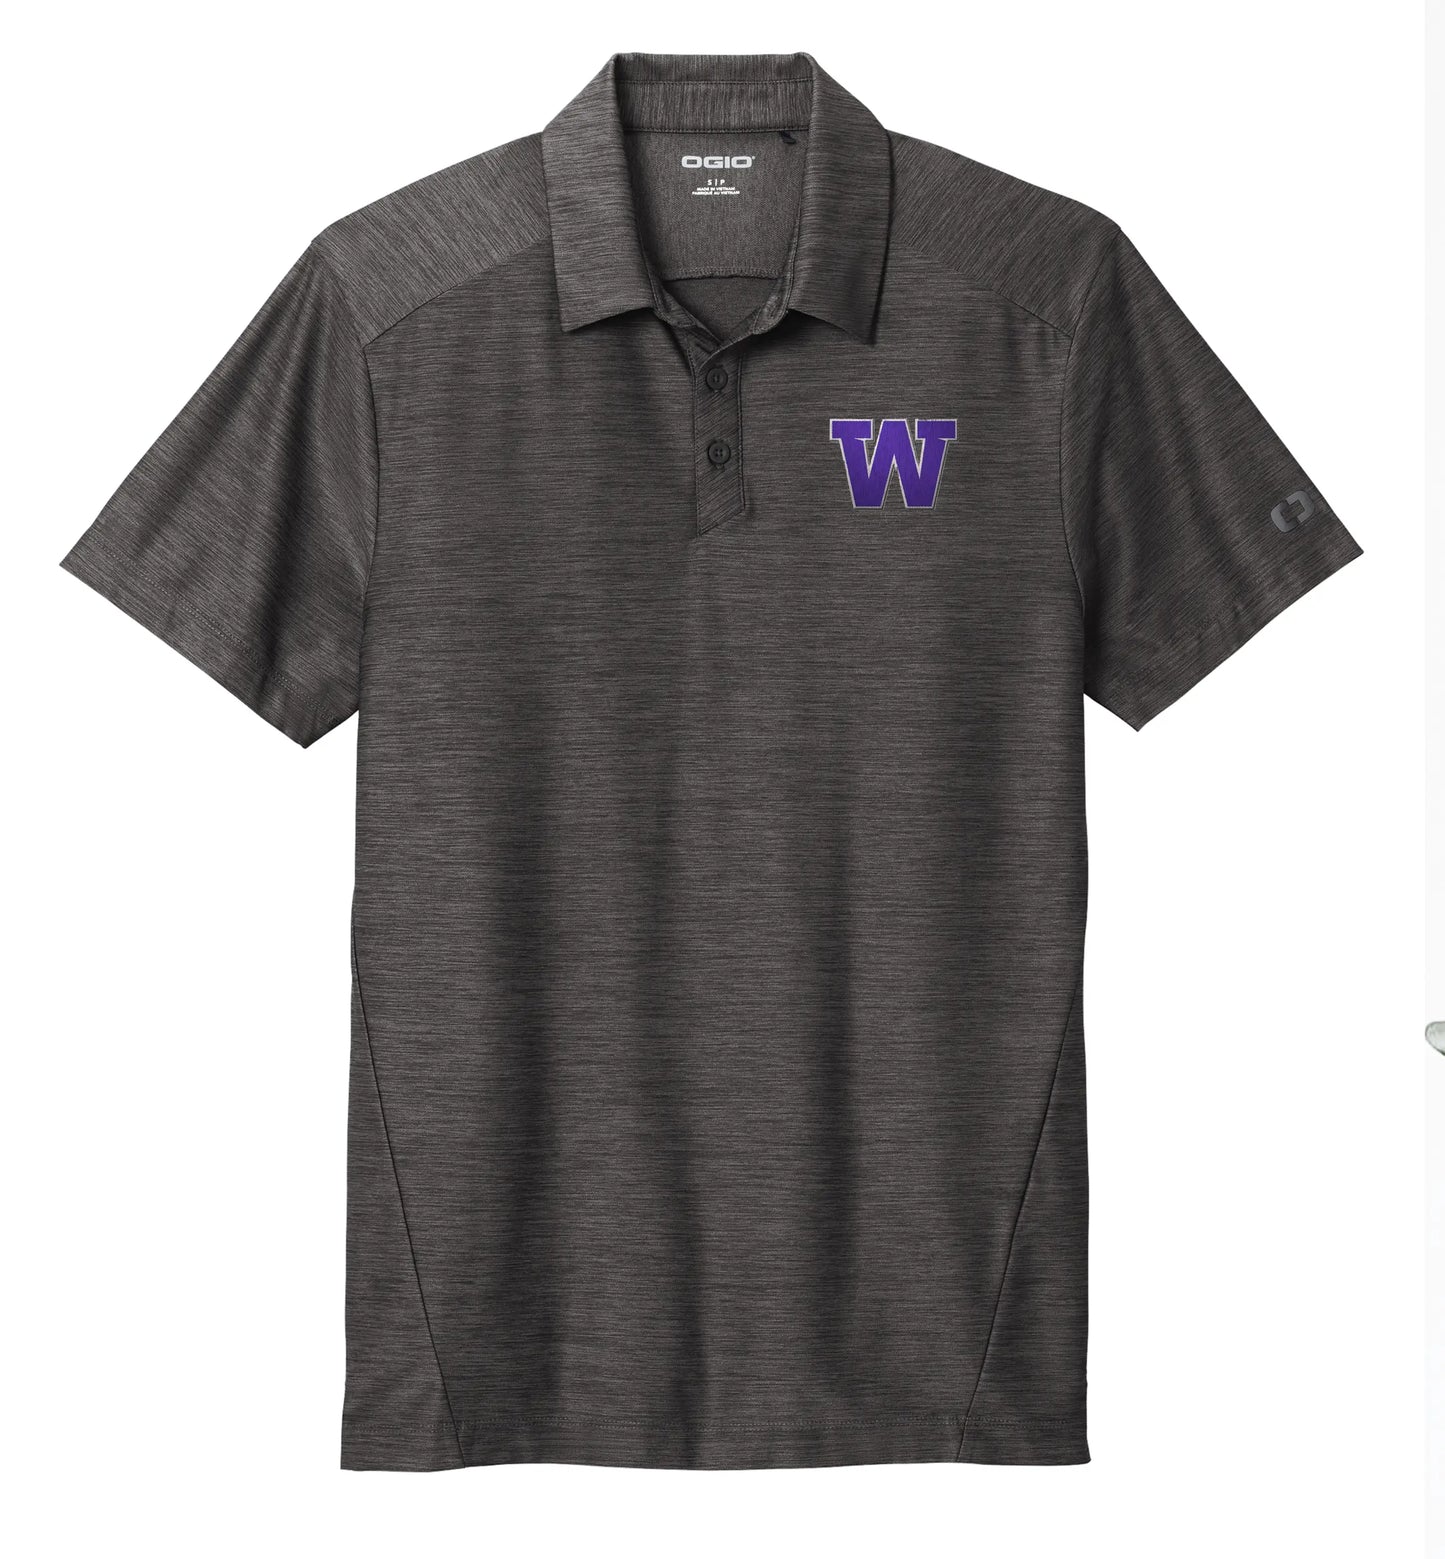 WARRIORS Embroidered Polo